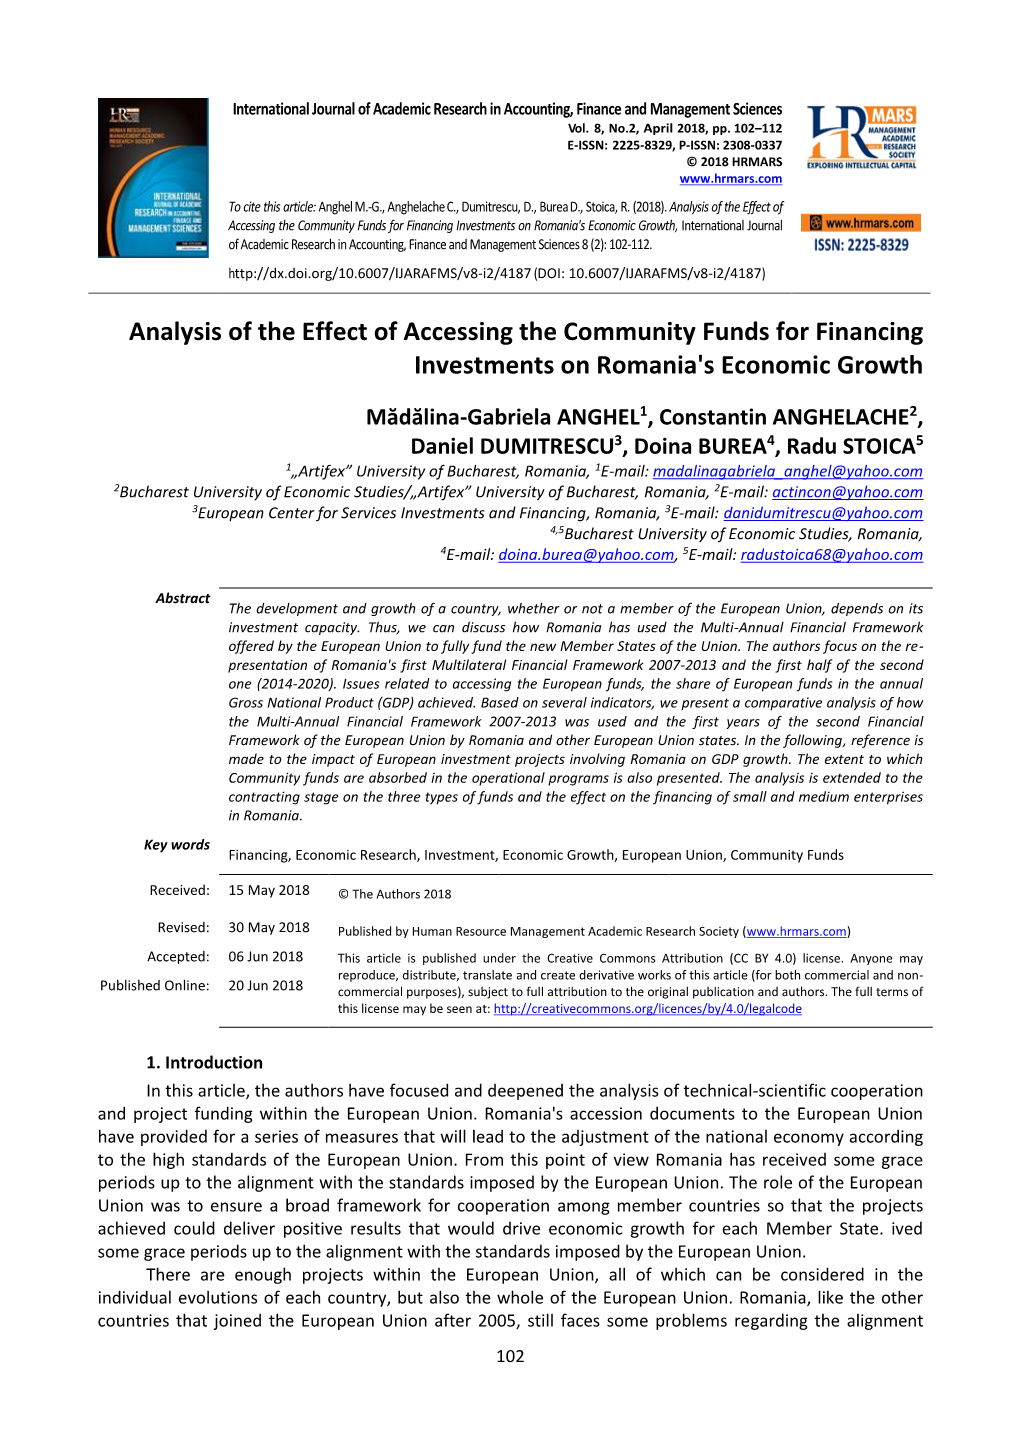 Analysis of the Effect of Accessing the Community Funds for Financing